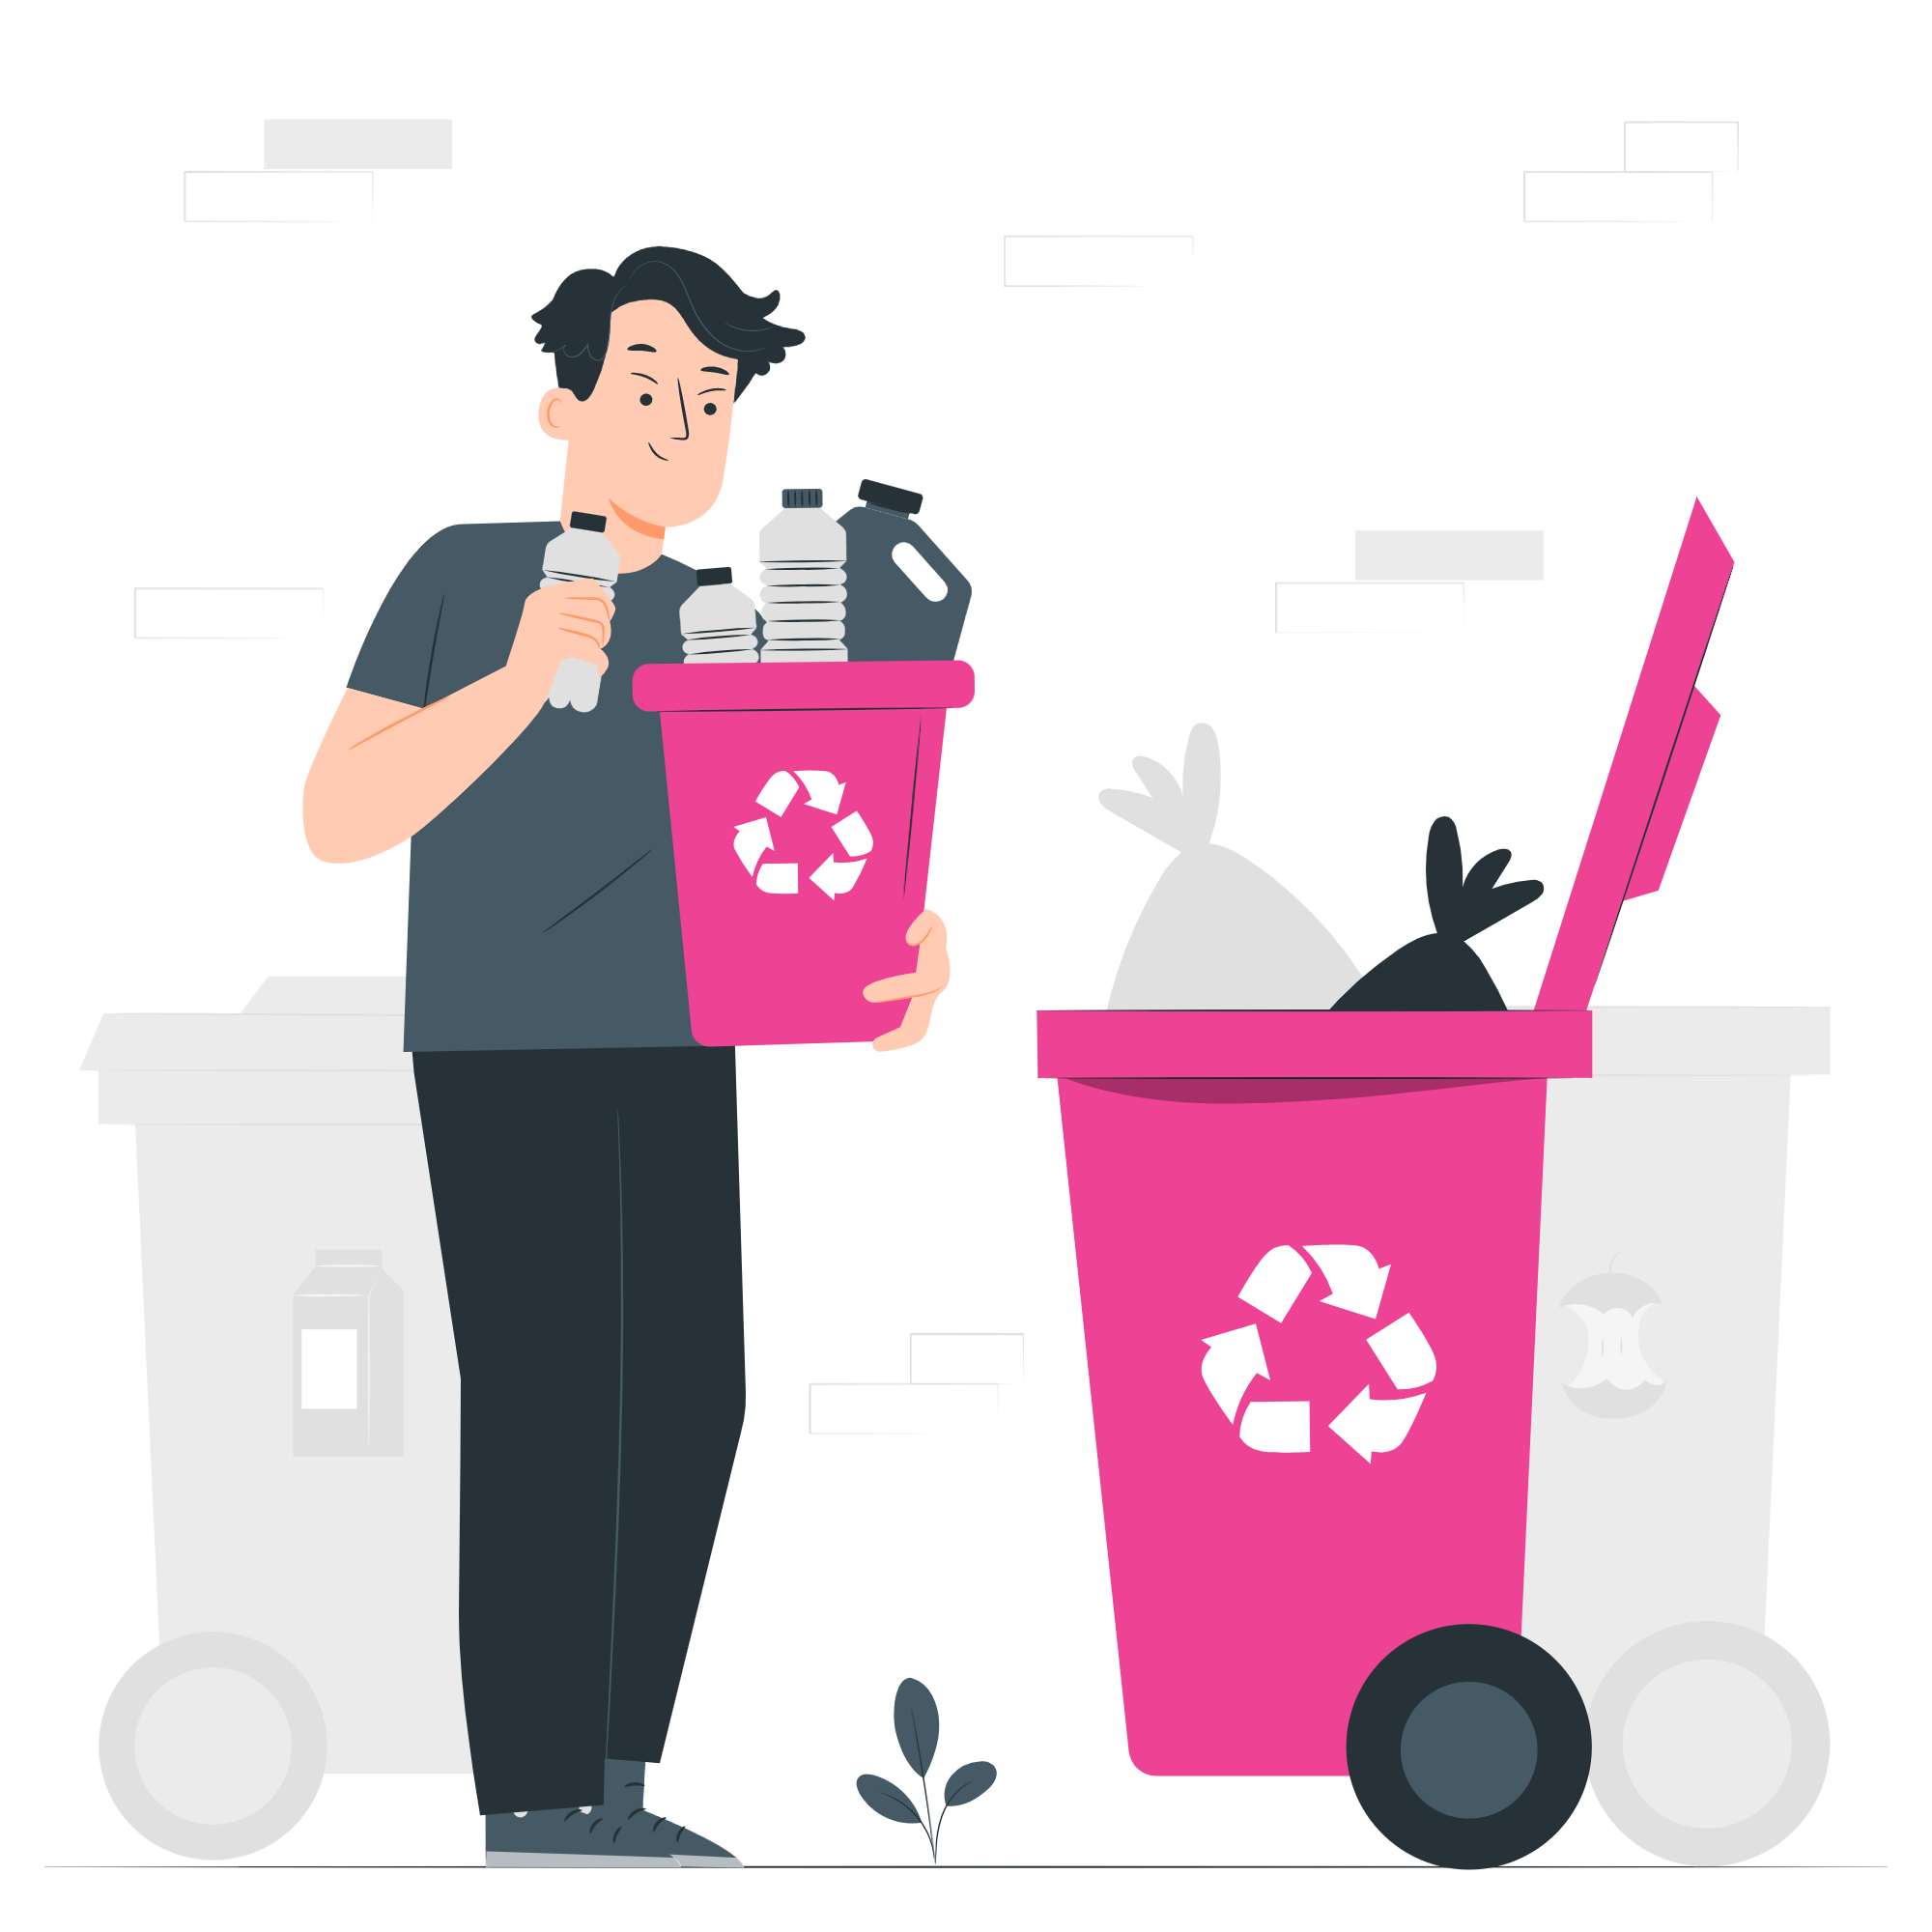 An illustrated person putting recycling into the recycling bin